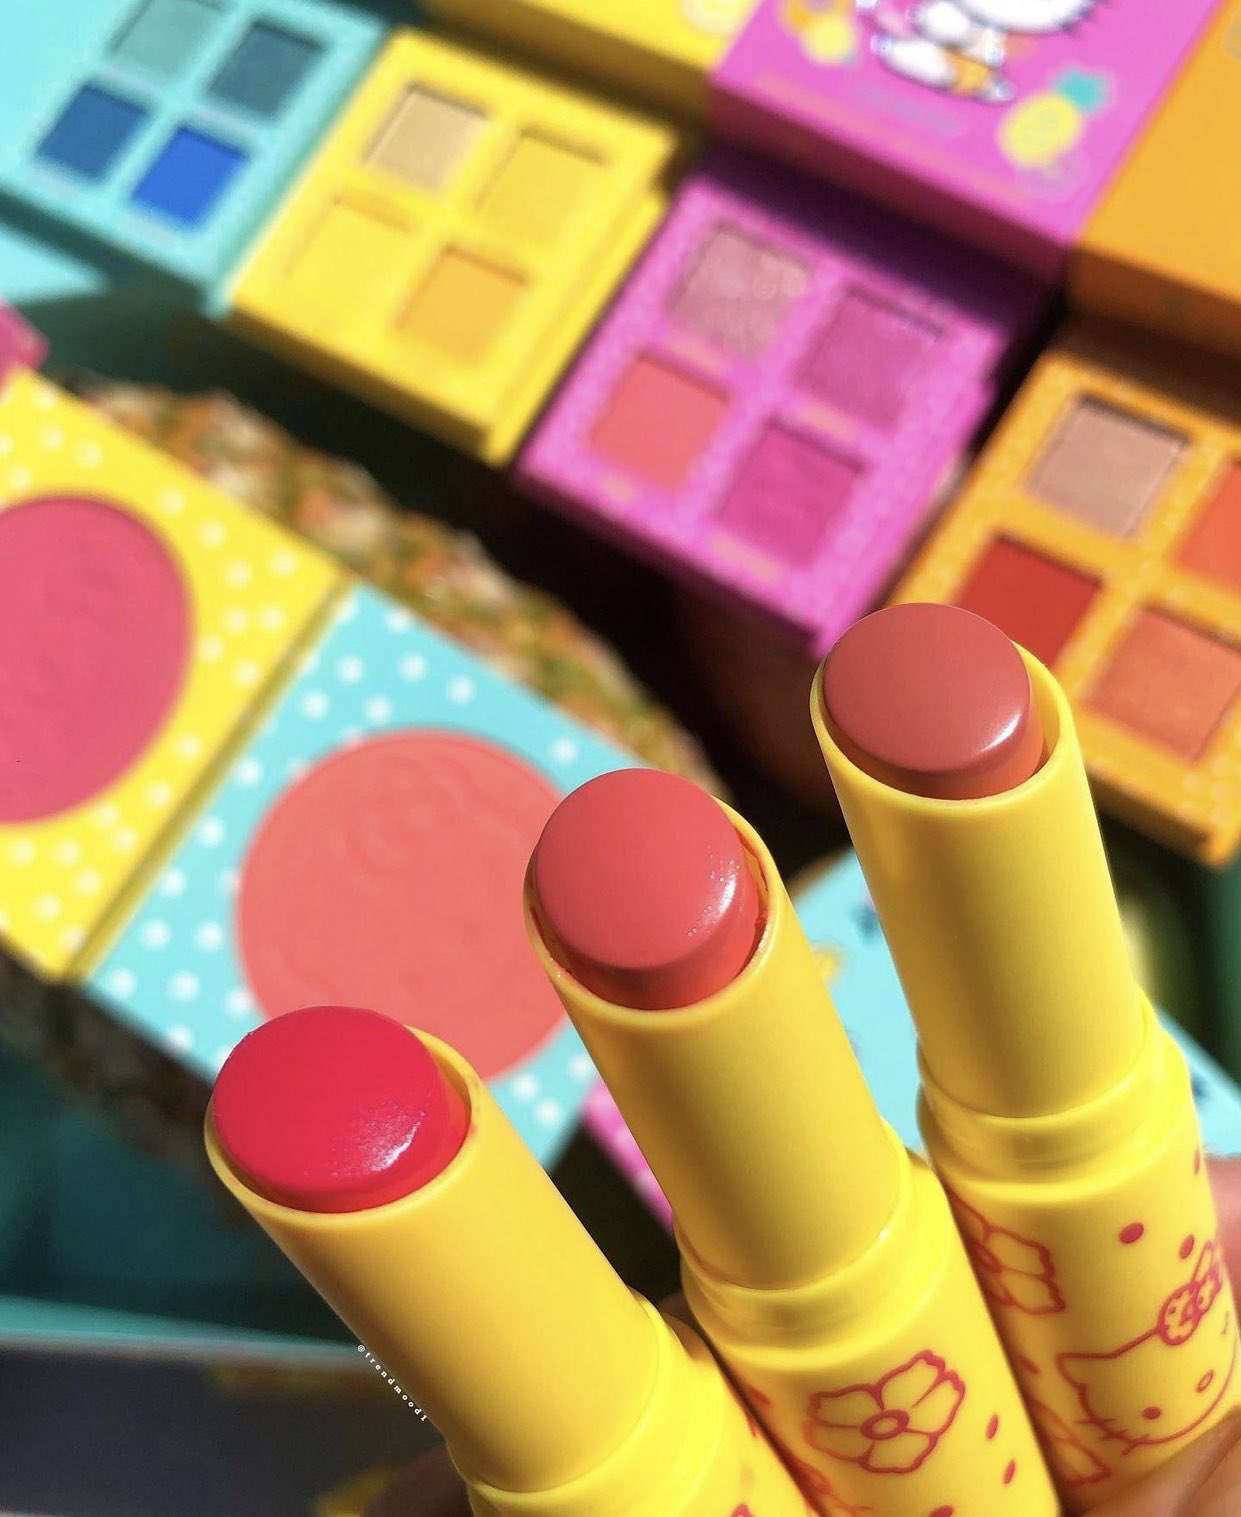 ColourPop x Hello Kitty3 - ColourPop x Hello Kitty New Summer Collection